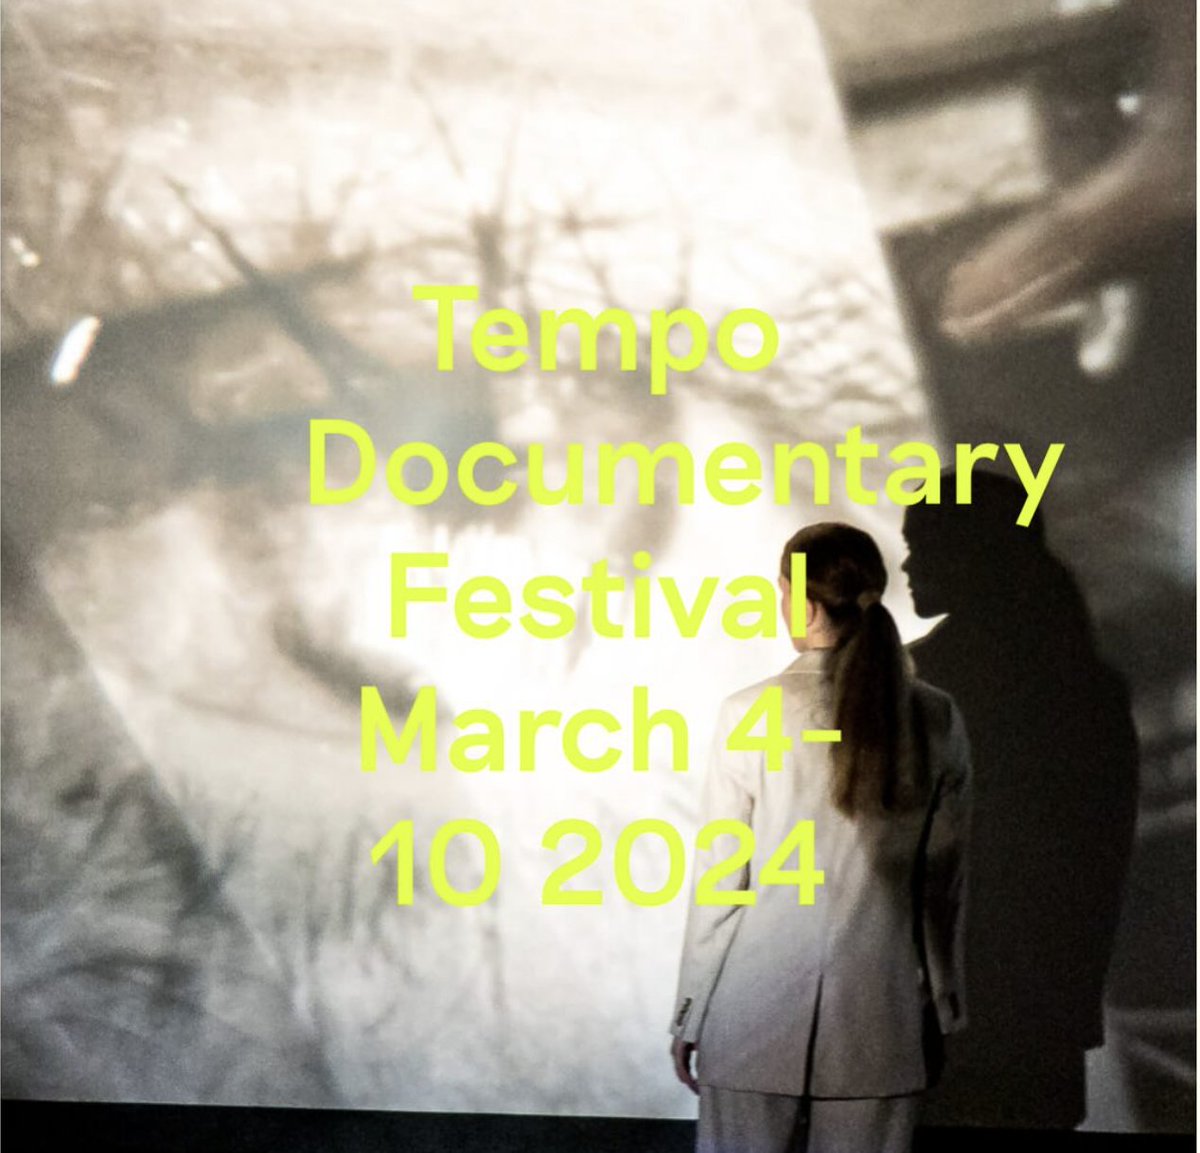 Eat Bitter continues its festival circuit in Europe! We will be part of the TOP DOCS program at the Tempo Documentary Festival in Stockholm, Sweden on March 4-10, 2024! #Documentary